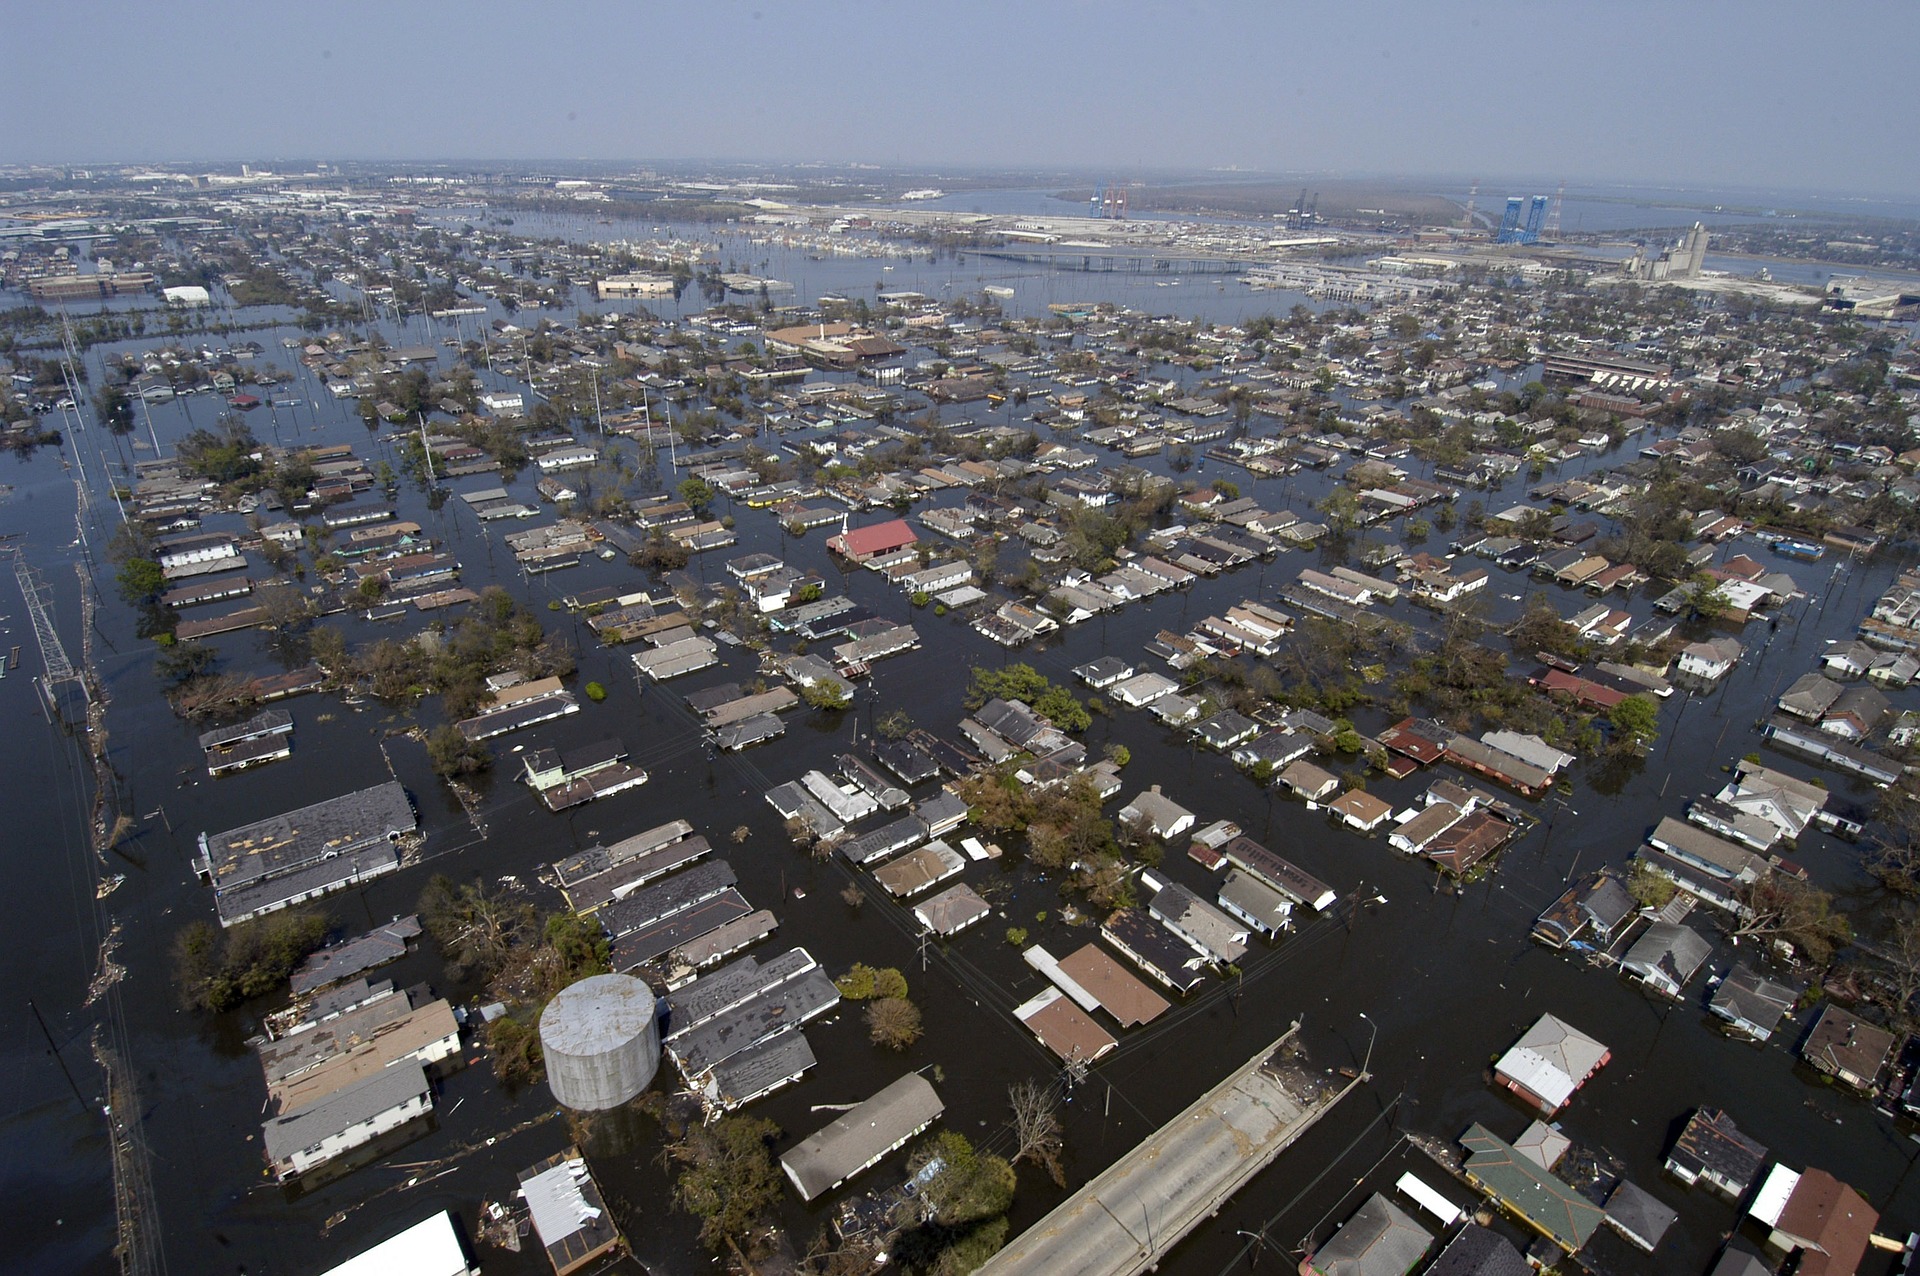 Flooding in New Orleans, Louisiana